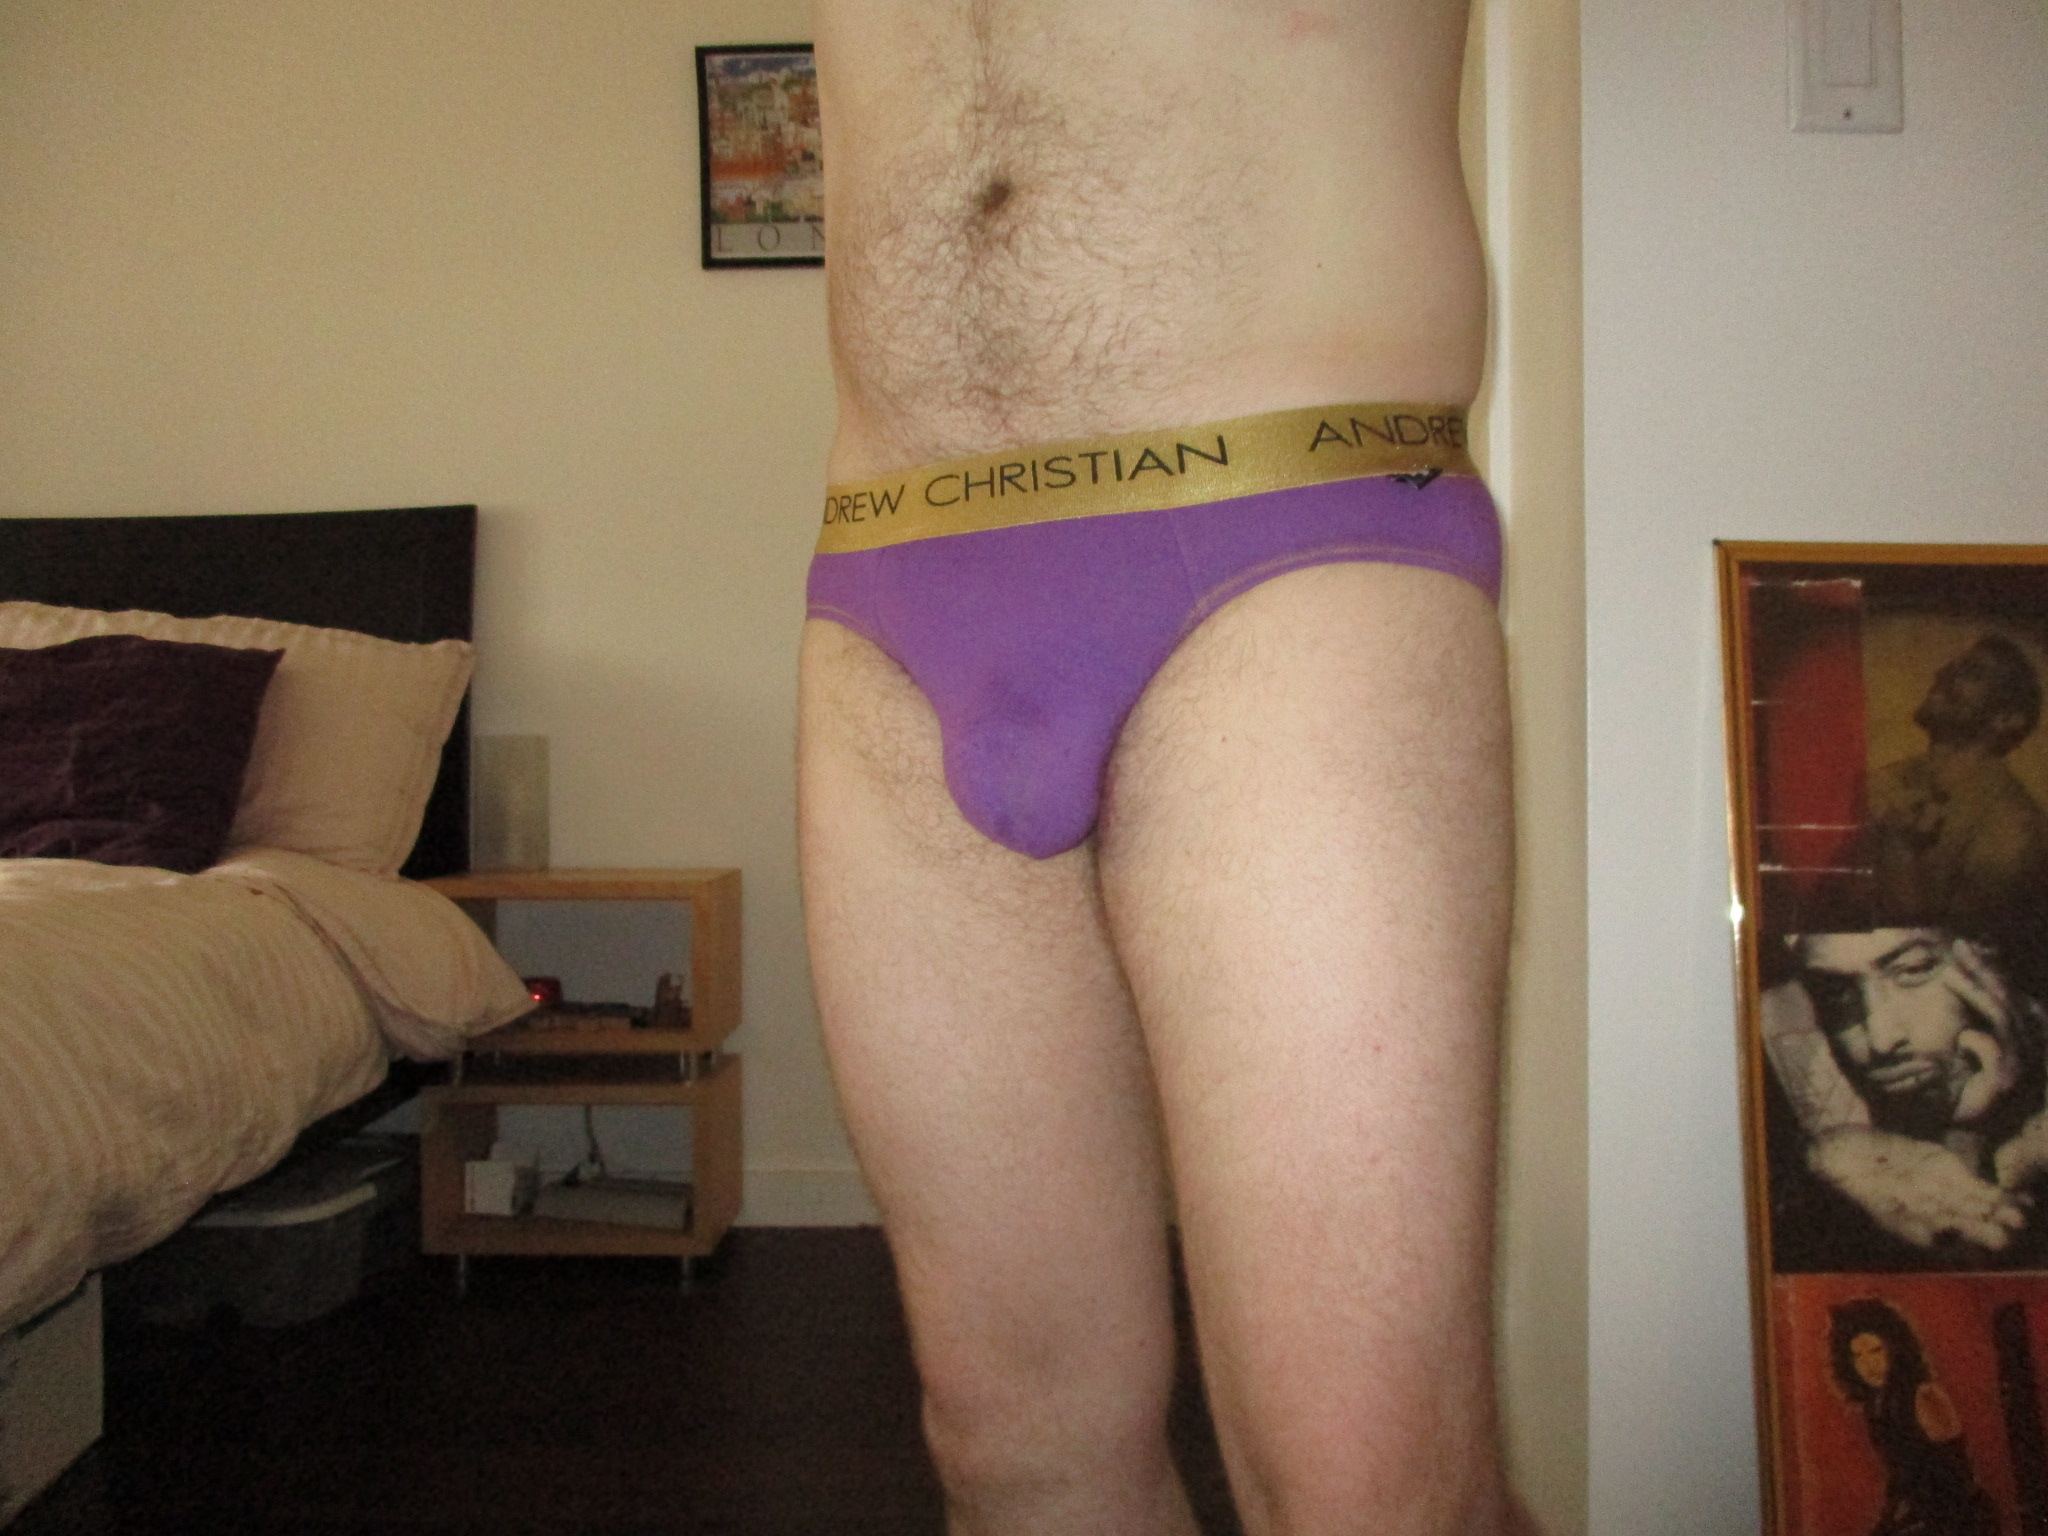 Back to briefs to feel more like myself…